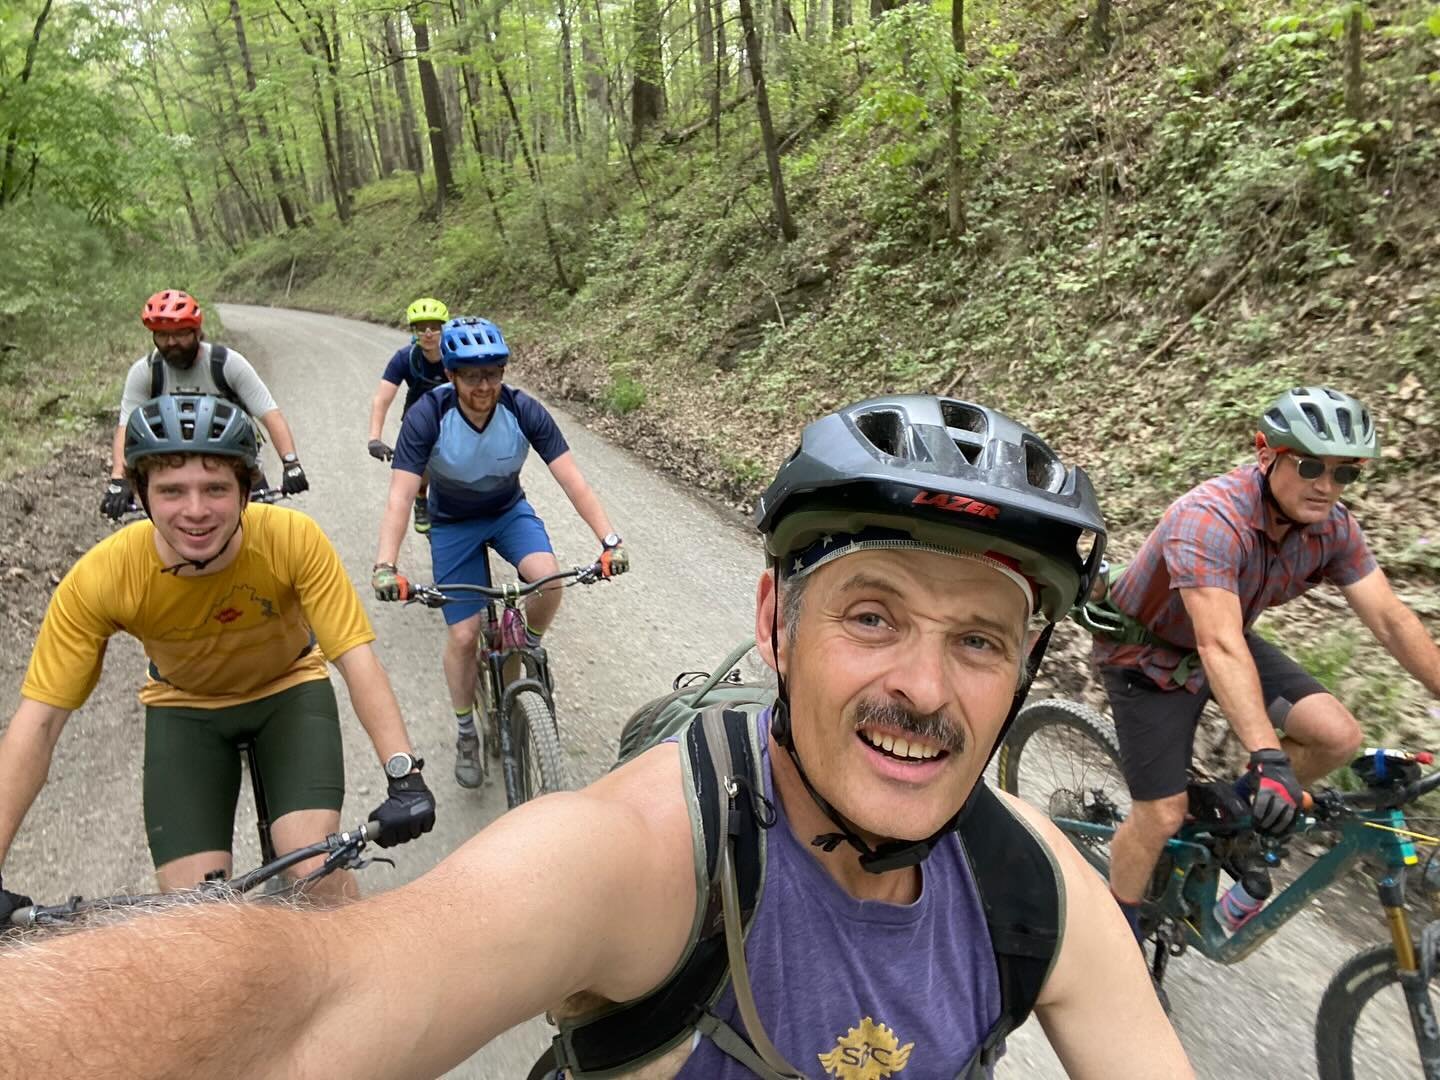 Friday Fatty vibes! Good times, complete with lighting, downpours, rattlesnakes, tiny hail drops pinging our helmets and giggles all around! &ldquo;All hail the dark wizard&rdquo;? 🐍⛈️⚡️🧙&zwj;♂️